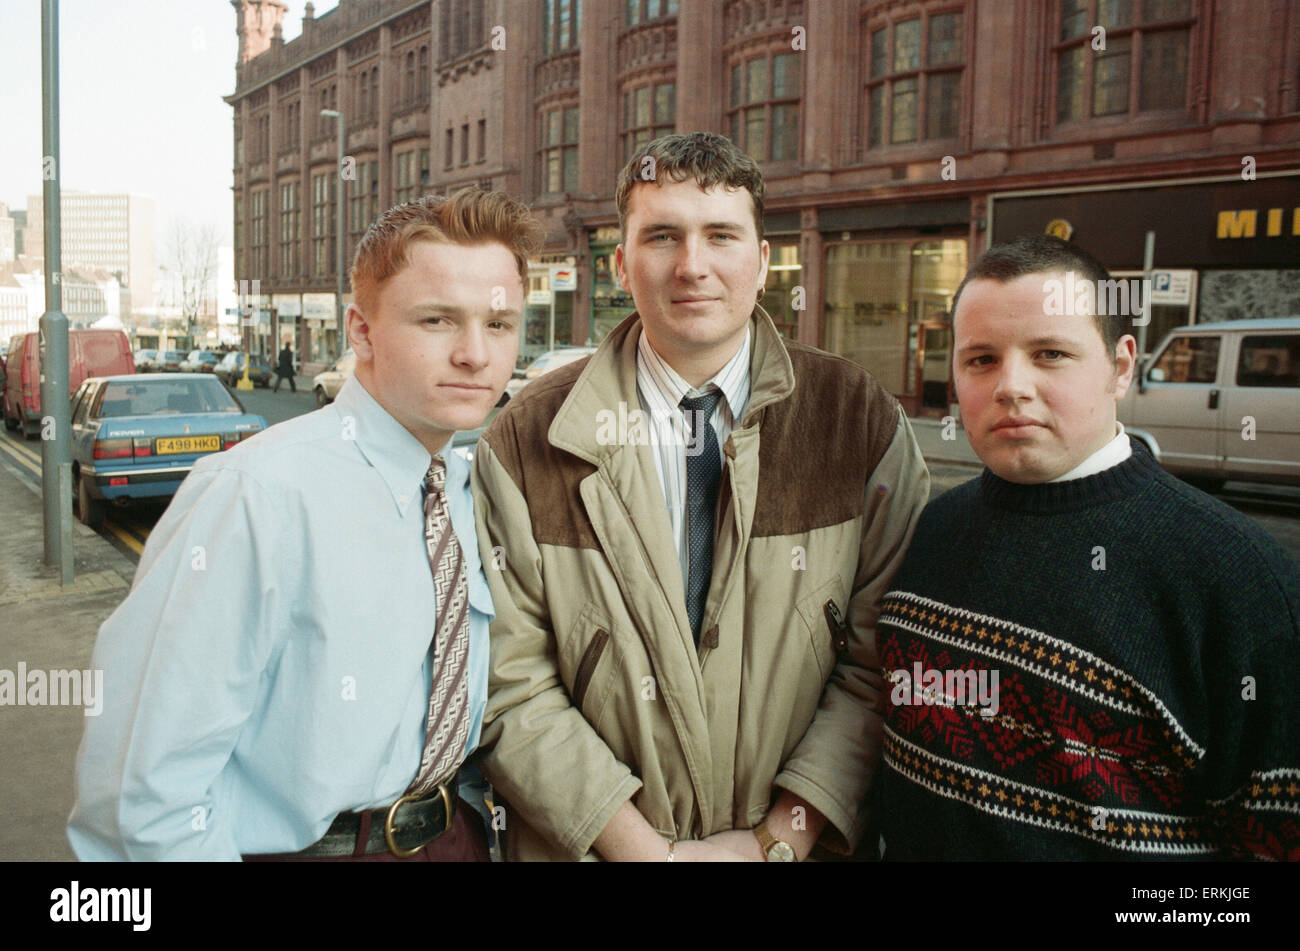 Three football supporters who obtained services at Birmingham City football ground, photographed outside Birmingham Magistrates court. They are left to right: David Elroy, Ray Bond and Scott Finnegan. 15th January 1991. Stock Photo